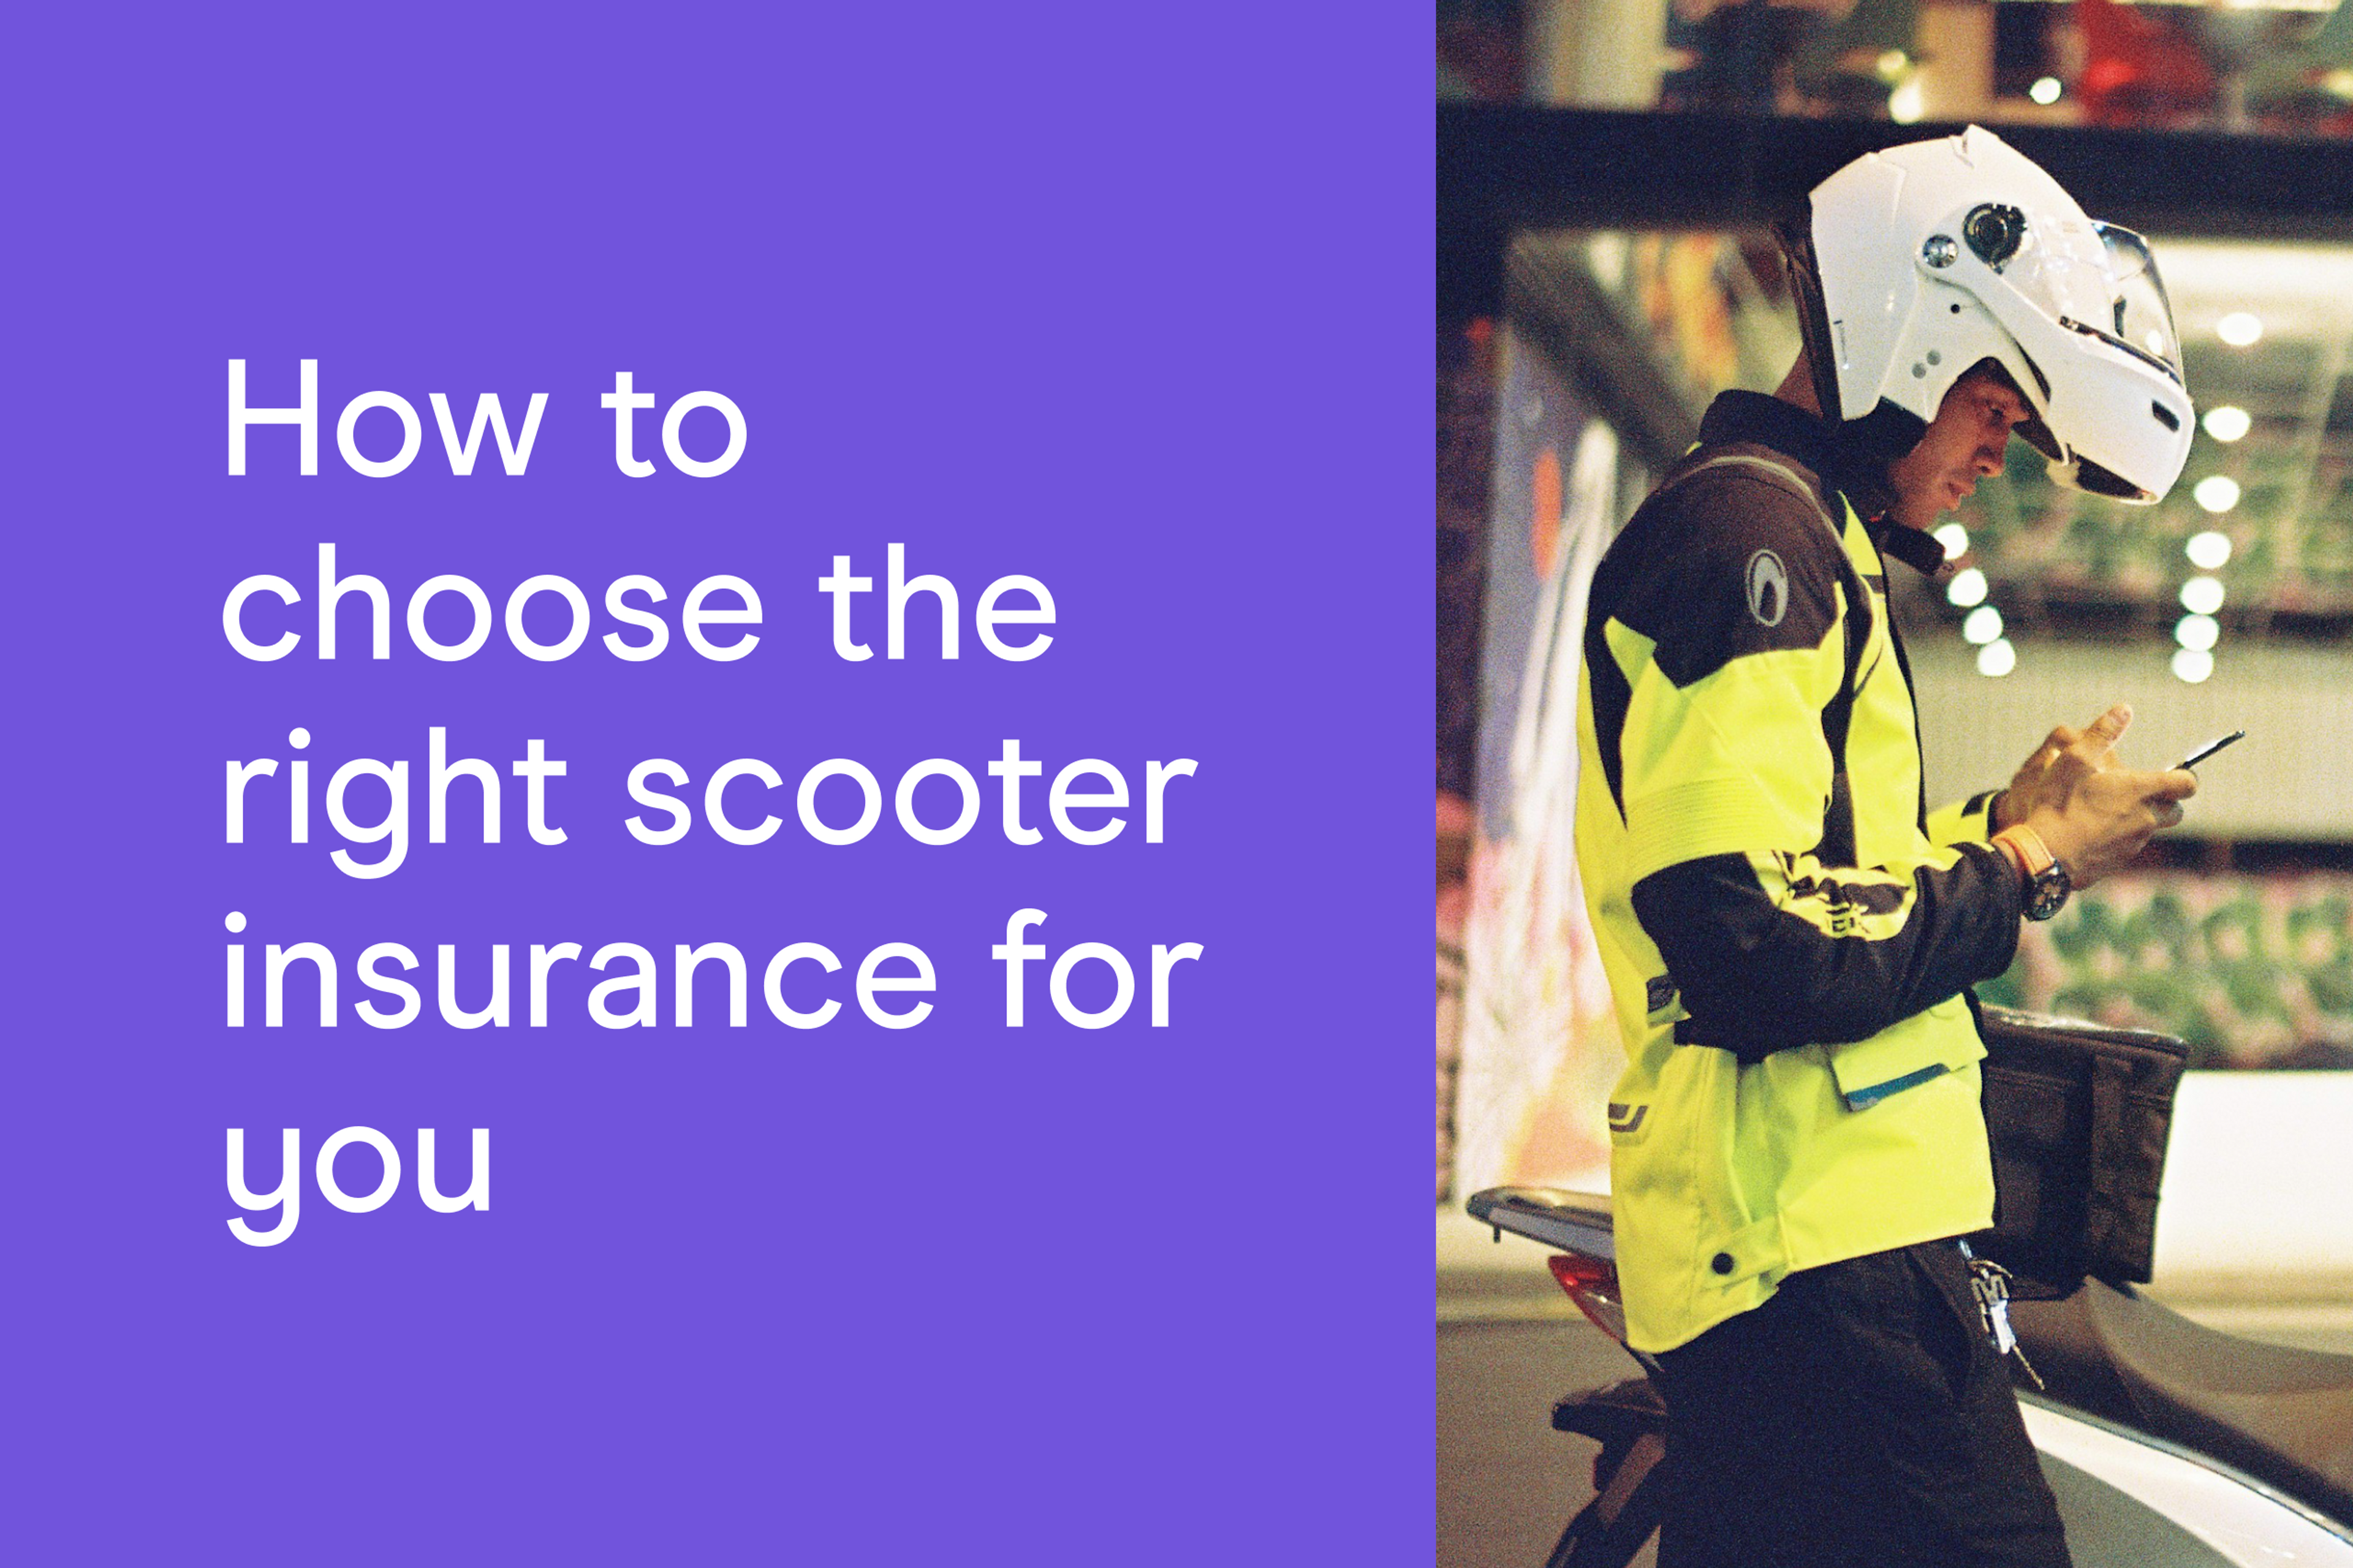 How to choose the right scooter insurance for you